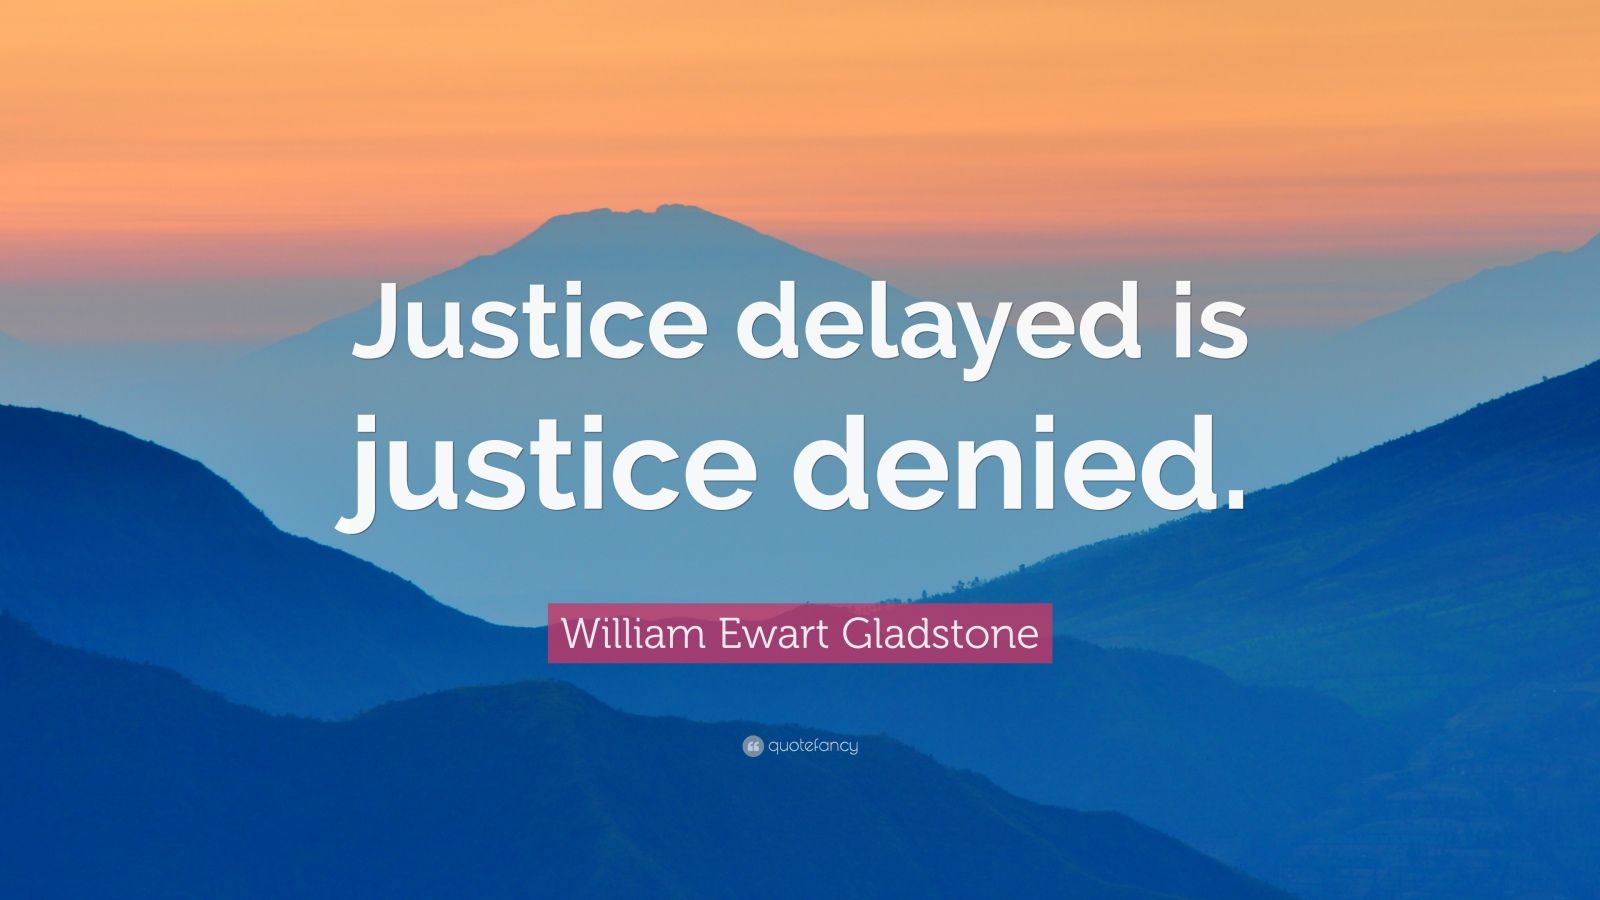 essay on justice delayed is justice denied